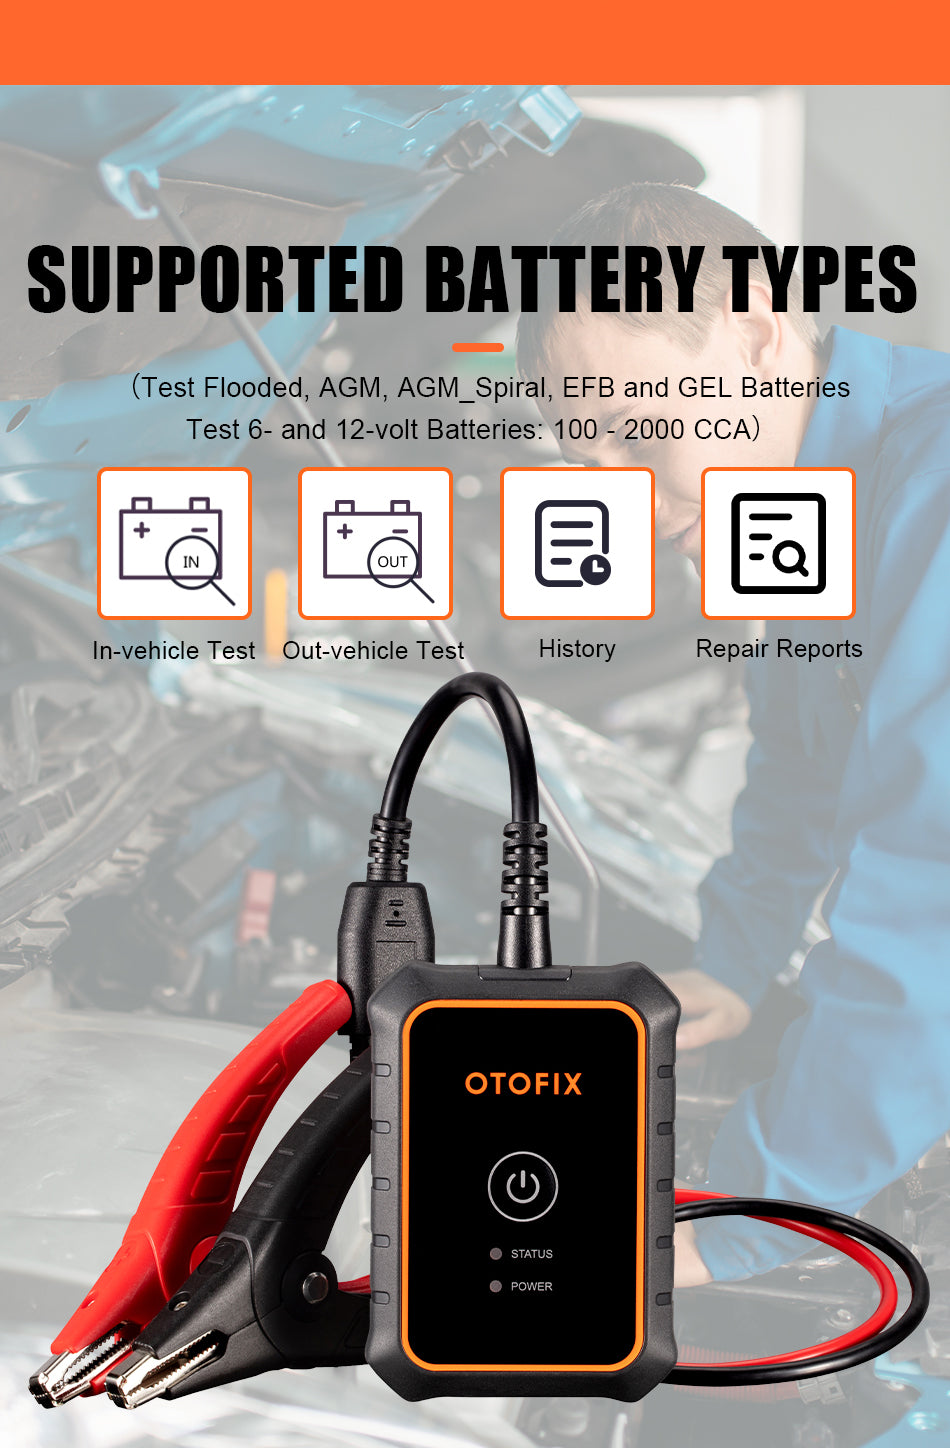 OTOFIX BT1 Lite Car Battery Analyser Auto Diagnostic Tool OBD2 Scanner Tester supported battery types.